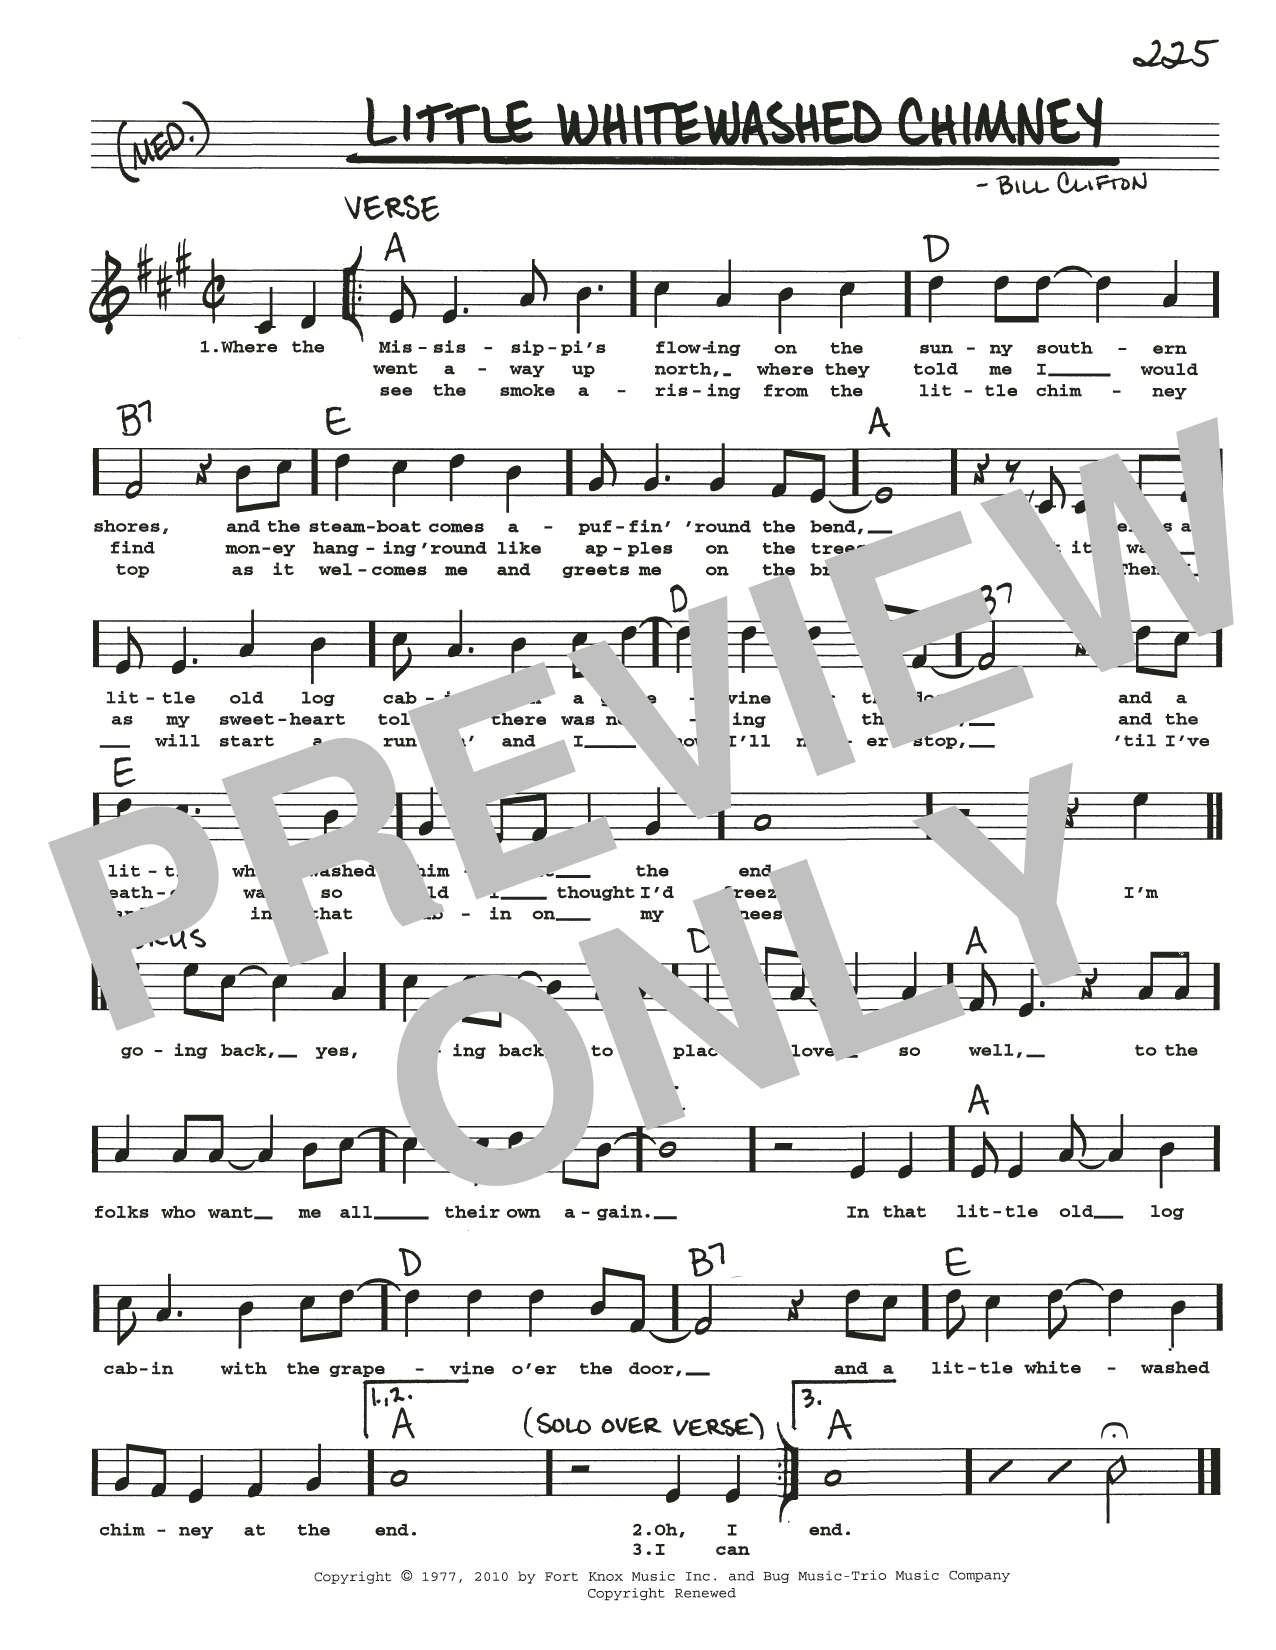 Download Bill Clifton Little Whitewashed Chimney Sheet Music